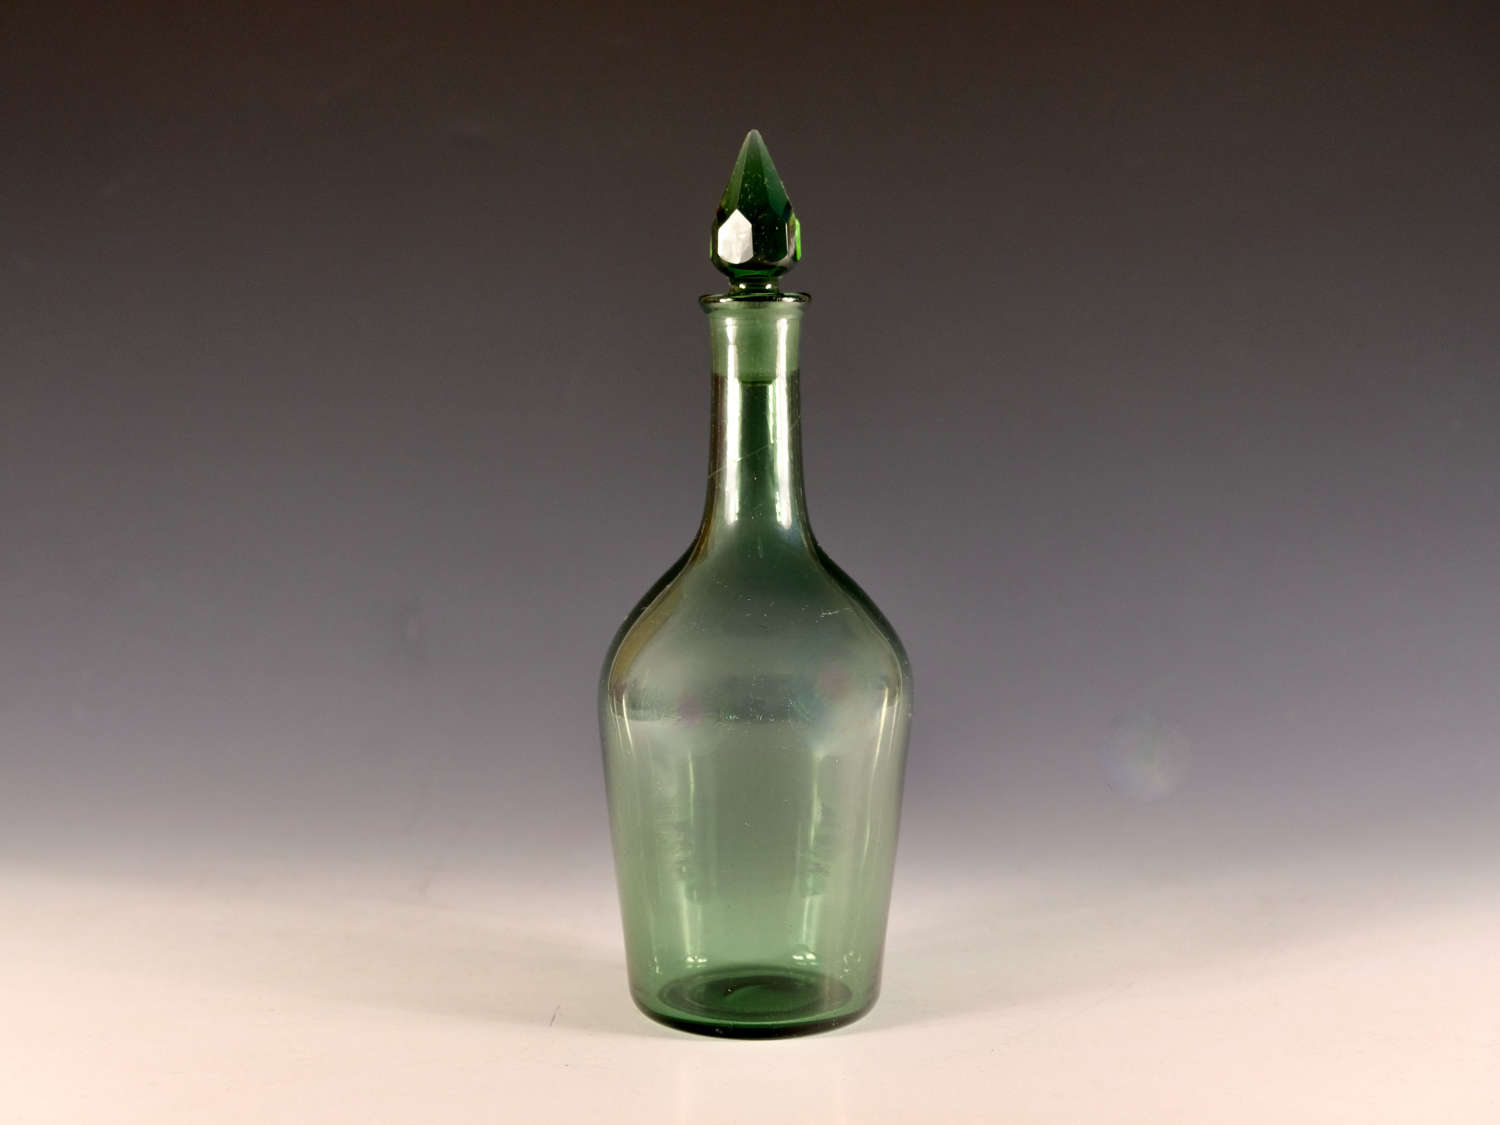 Antique glass - rare pale green shouldered decanter English c1765